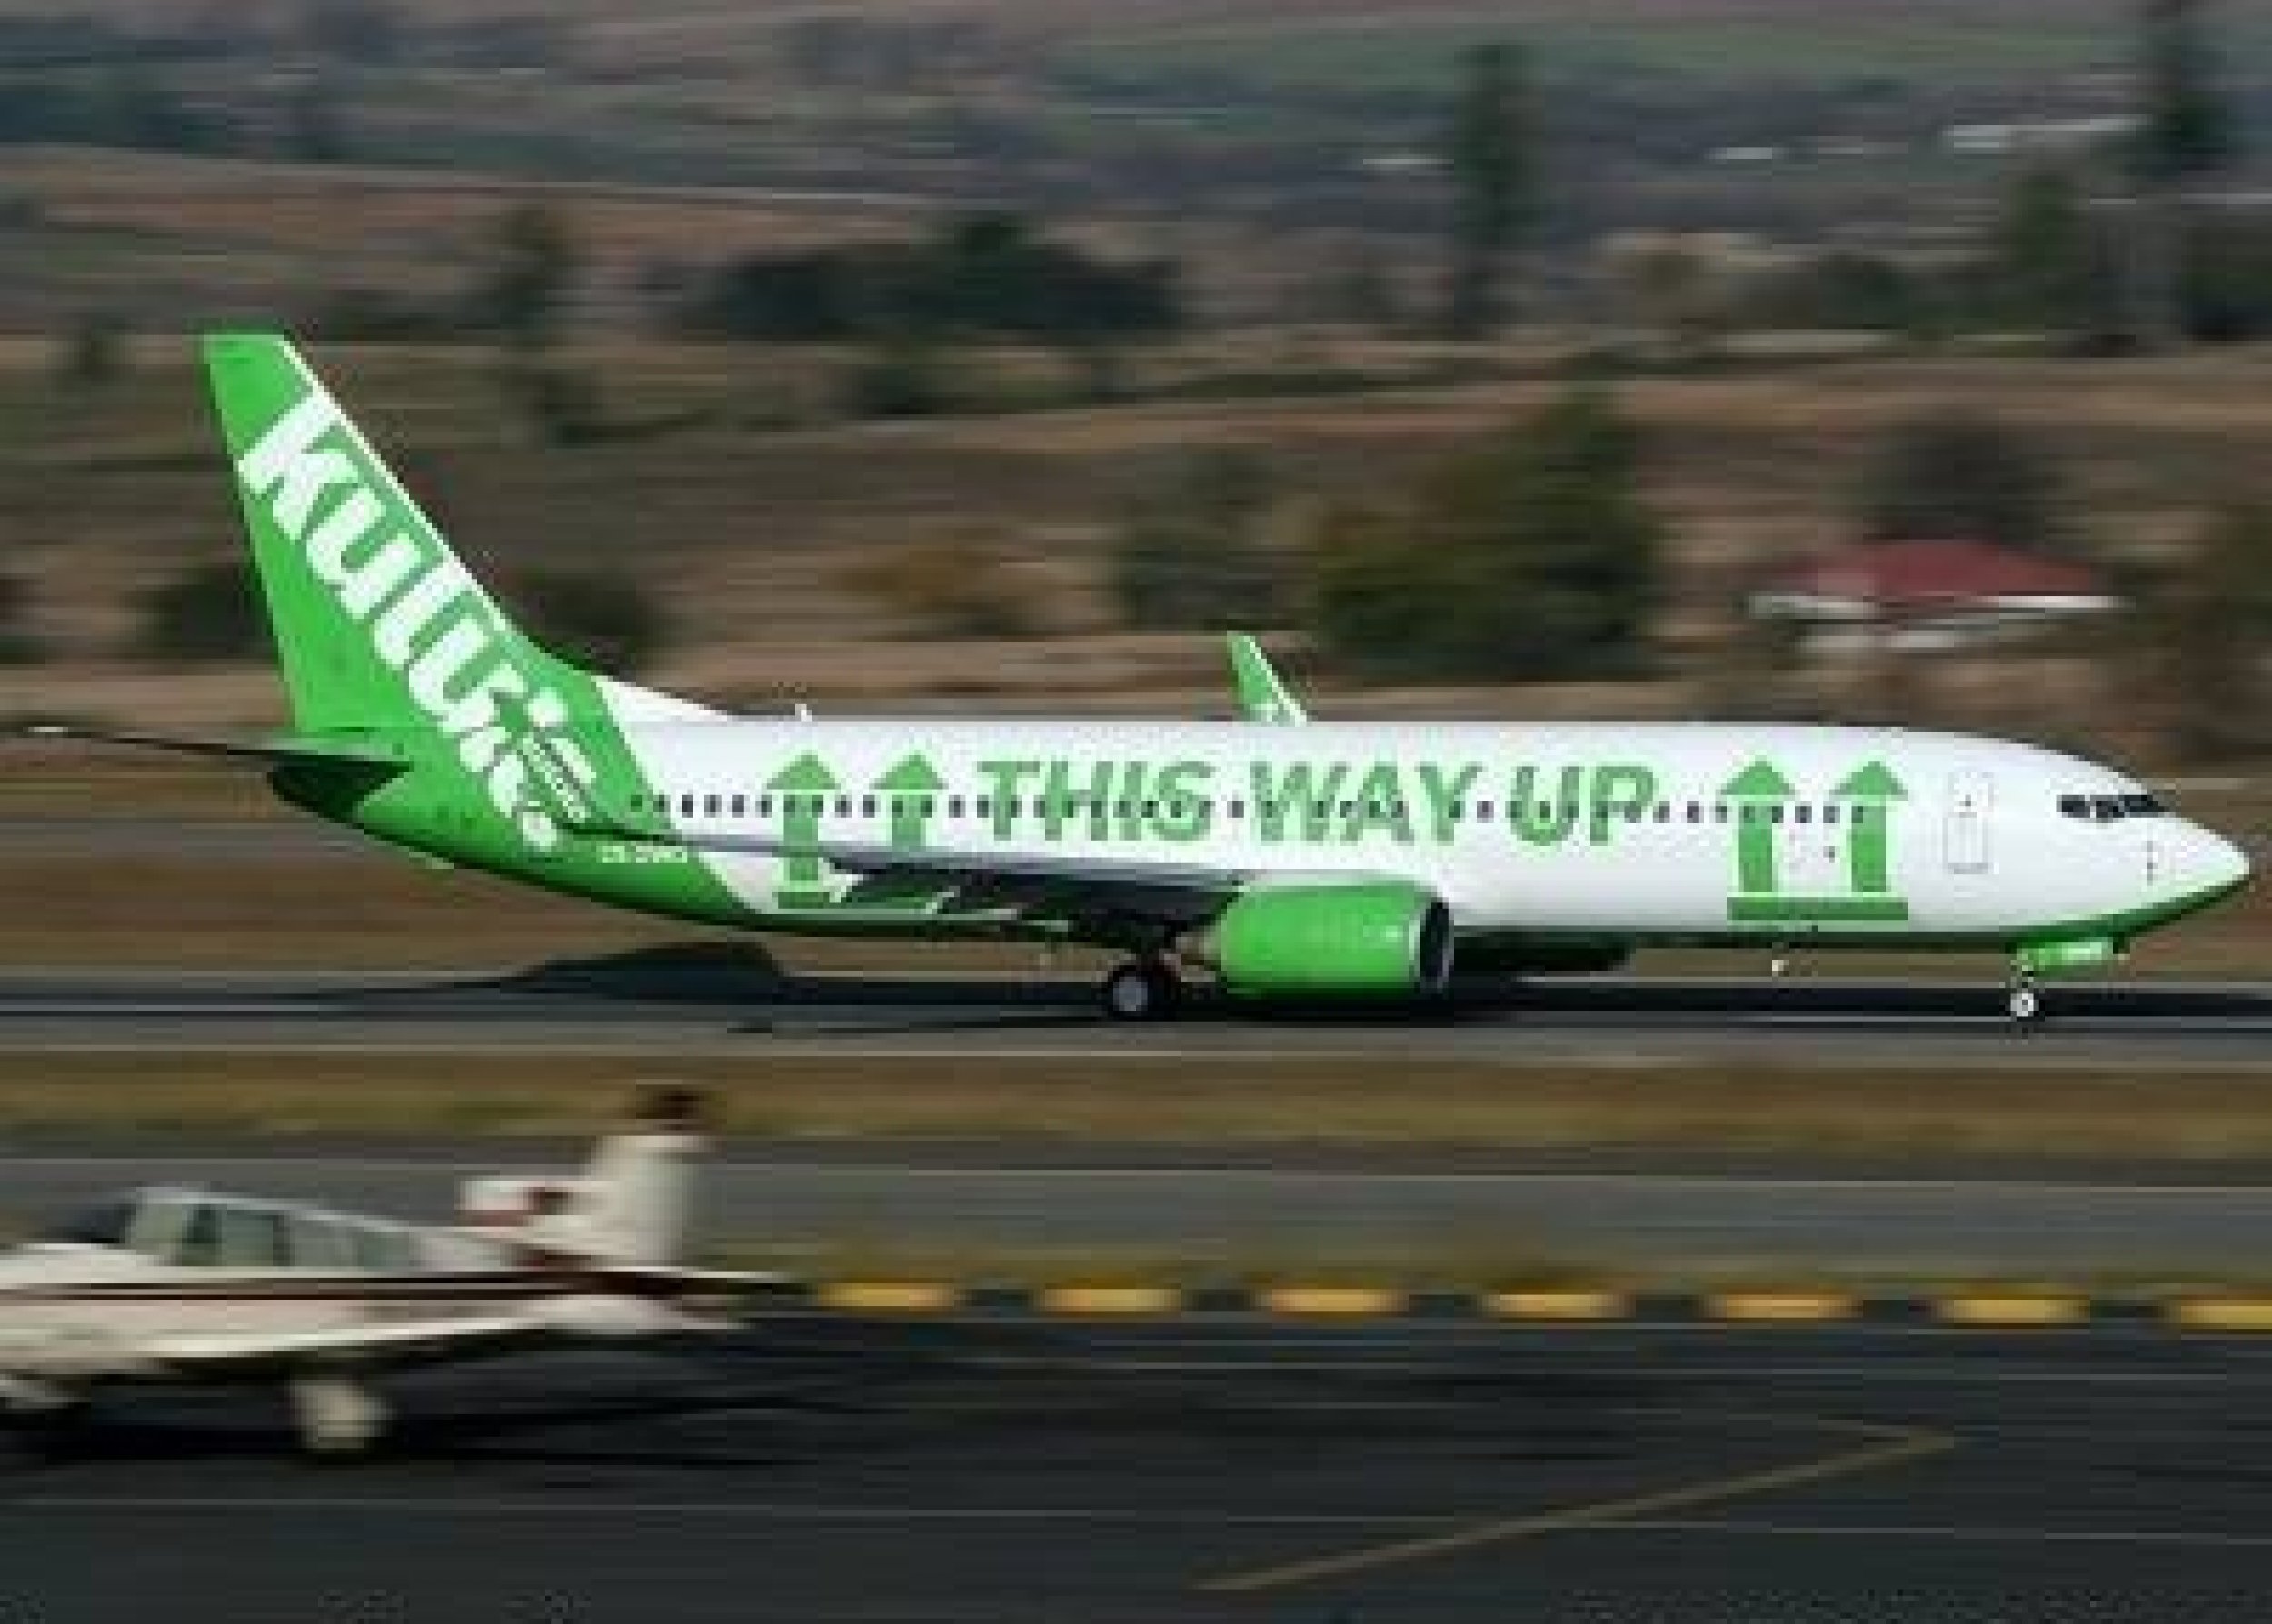 On this particular plane, Kulula uses humor to tell people which side of the plane should be up, which also doubly works to explain the only direction that the plane and the airline are headed. Here, we see Kulula ready for take-off.